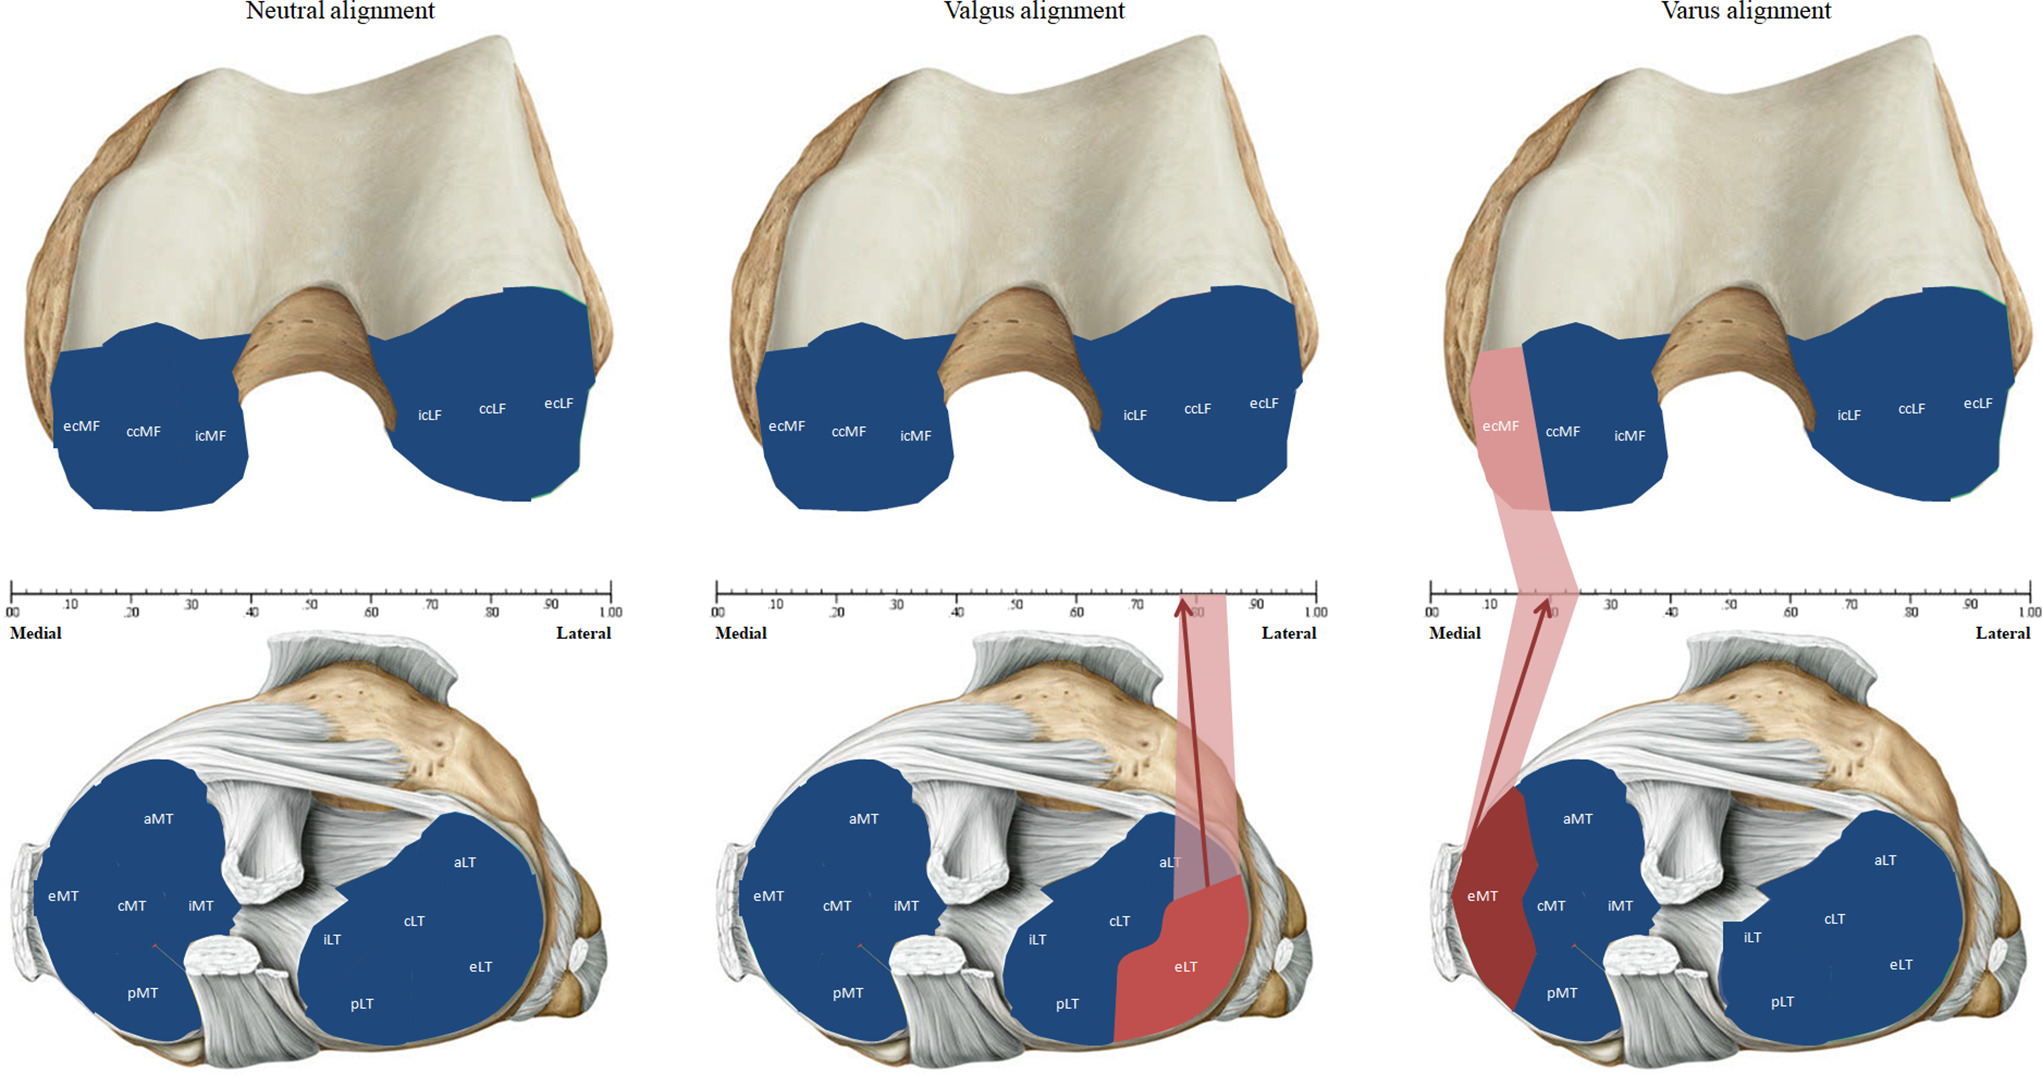 Fig. 7 
          Data derived from Table III show the analyzed subregions at the tibia (lower section) and the femur (upper section) with highlights of specific areas of high correlation between percentage of subchondral bone denuded of cartilage and its corresponding (x)-specific location. Colour-coded correlations: blue area, subregion with low statistical correlation (r > -0.6); pink area, subregion with high statistical correlation (r ≤ -0.7); red area, subregion with highest statistical correlation in its alignment group; arrow, (x)-location with highest statistical correlation in its alignment group. aLT, anterior lateral tibia; aMT, anterior medial tibia; ccLF, central lateral femur; ccMF, central medial femur; cLT, central lateral tibia; cMT, central medial tibia; ecLF, external central lateral femur; ecMF, external central medial femur; eLT, external lateral tibia; eMT, external medial tibia; icLF, internal central lateral femur; icMF, internal central medial femur; iLT, internal lateral tibia; iMT, internal medial tibia; pLT, posterior lateral tibia; pMT, posterior medial tibia.
        